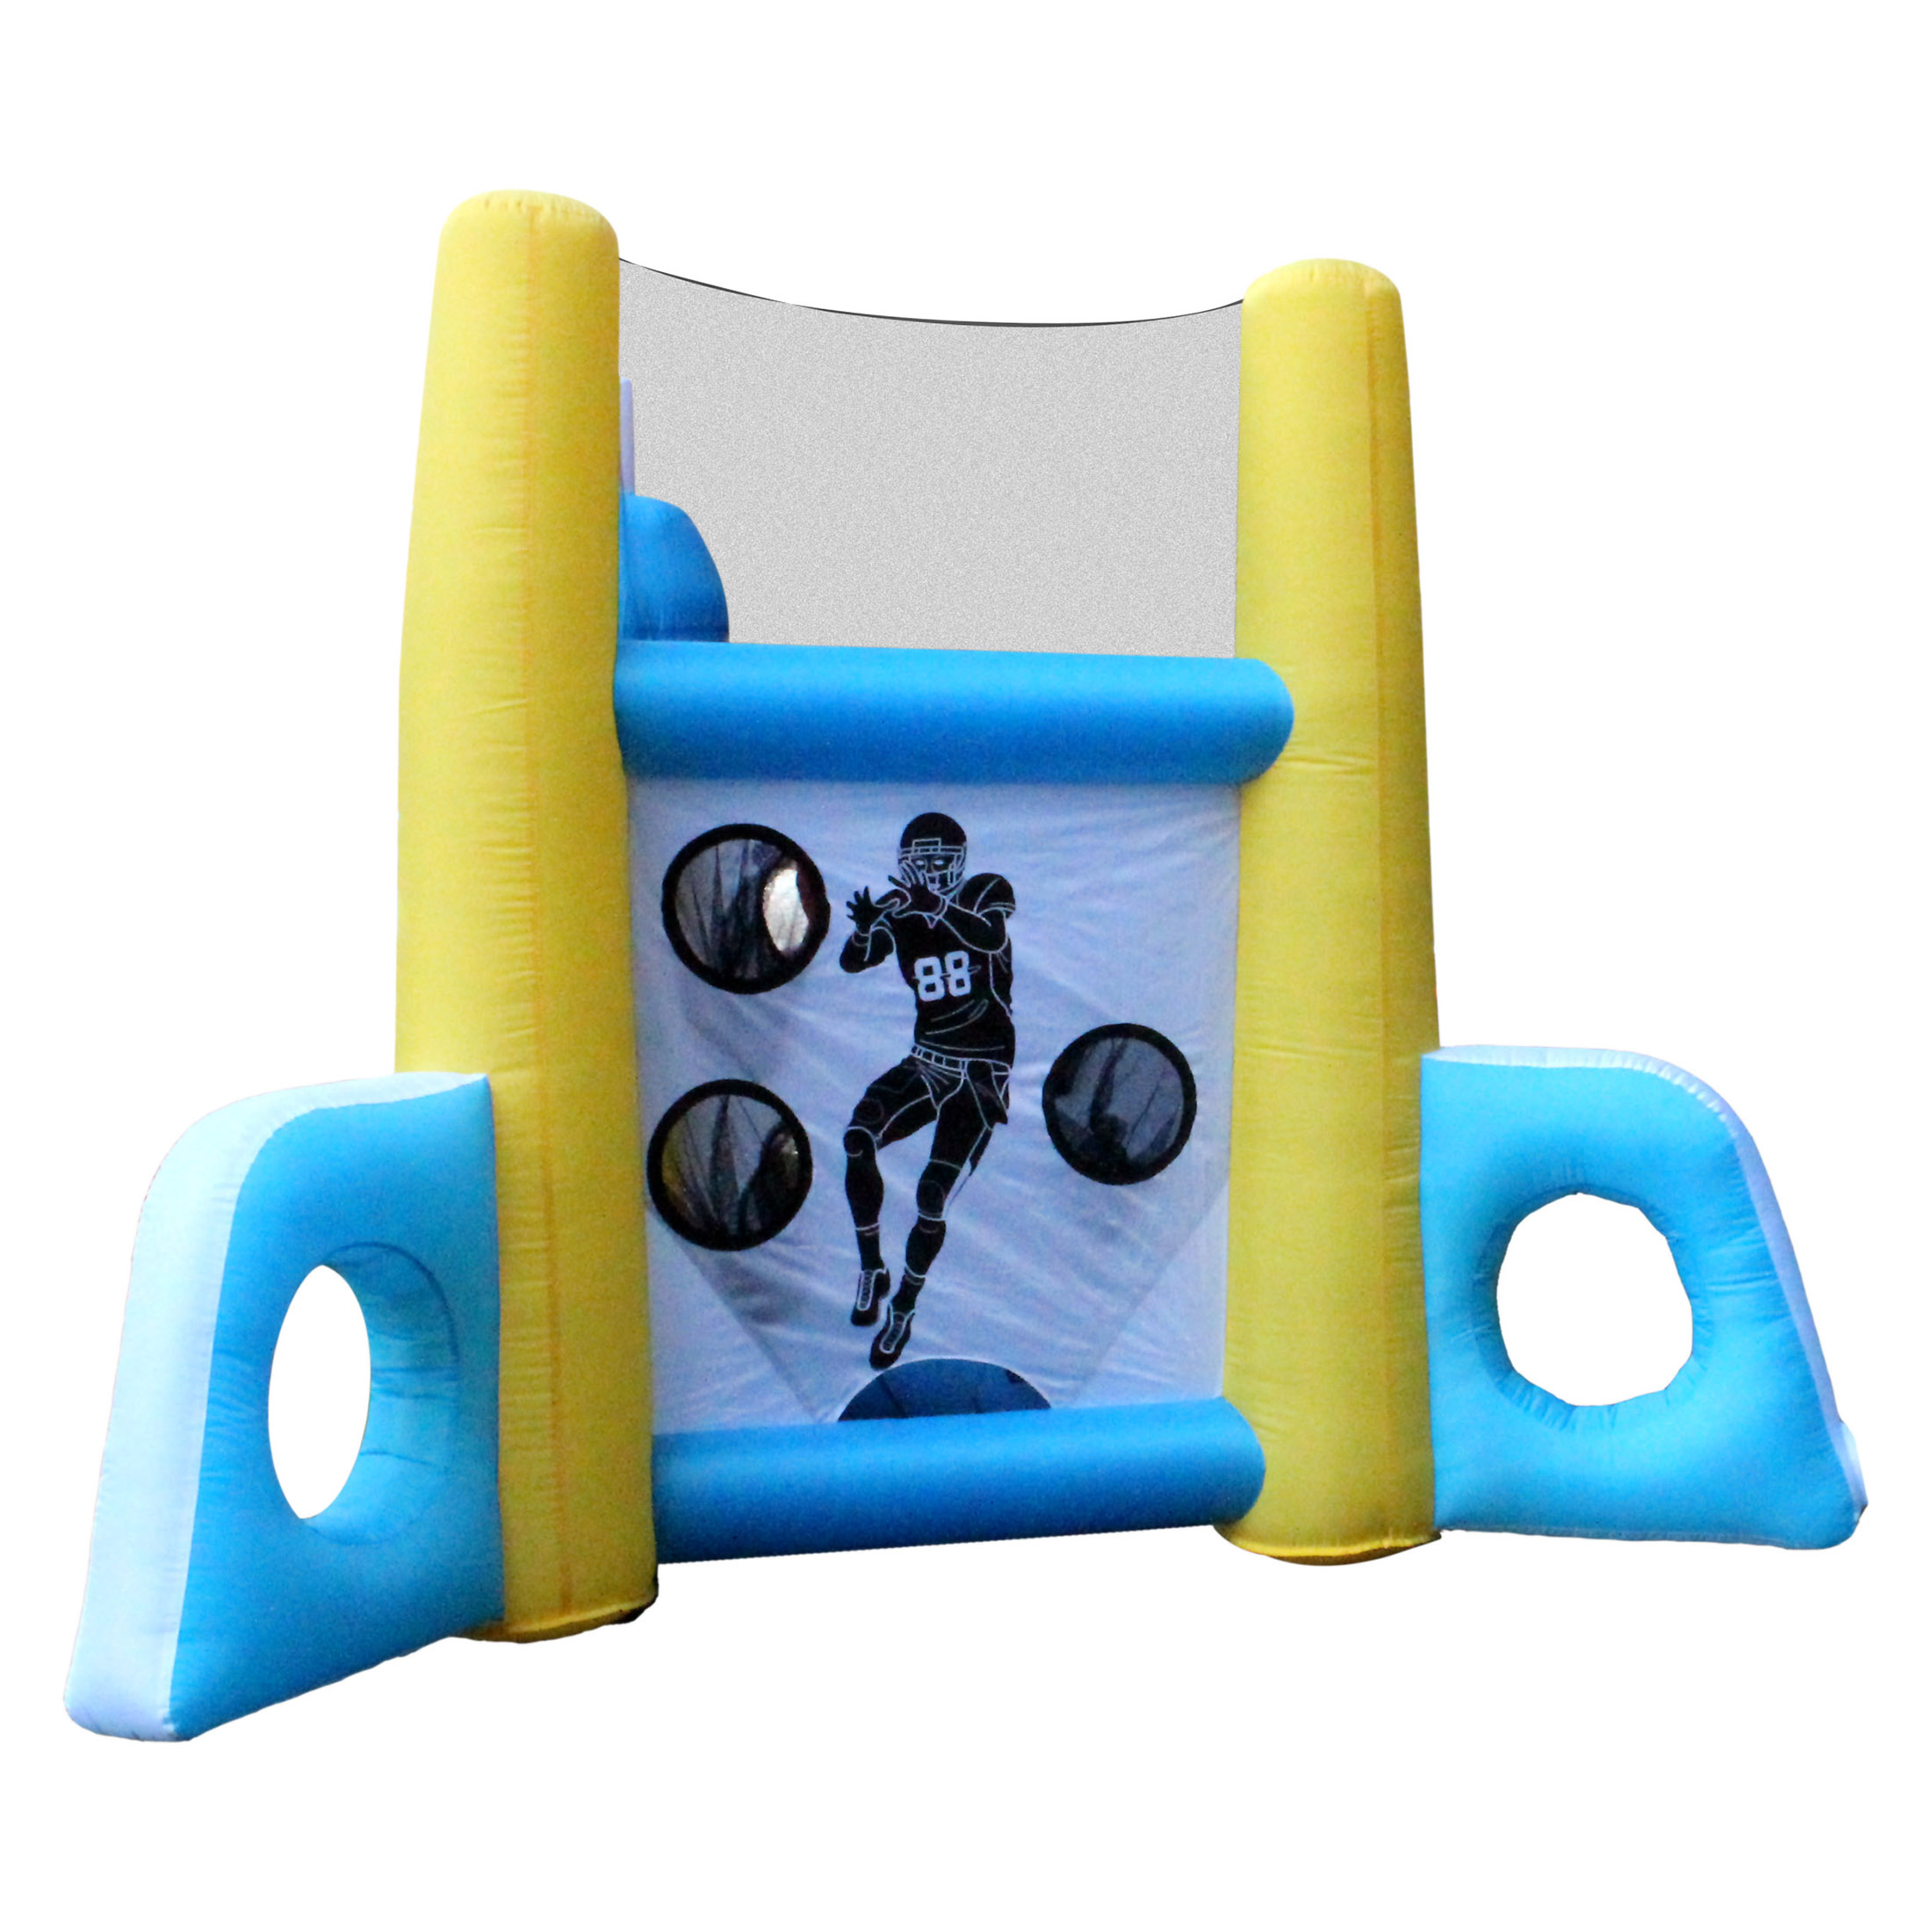 Sportspower Quick Set up Sports Trainer - image 4 of 10